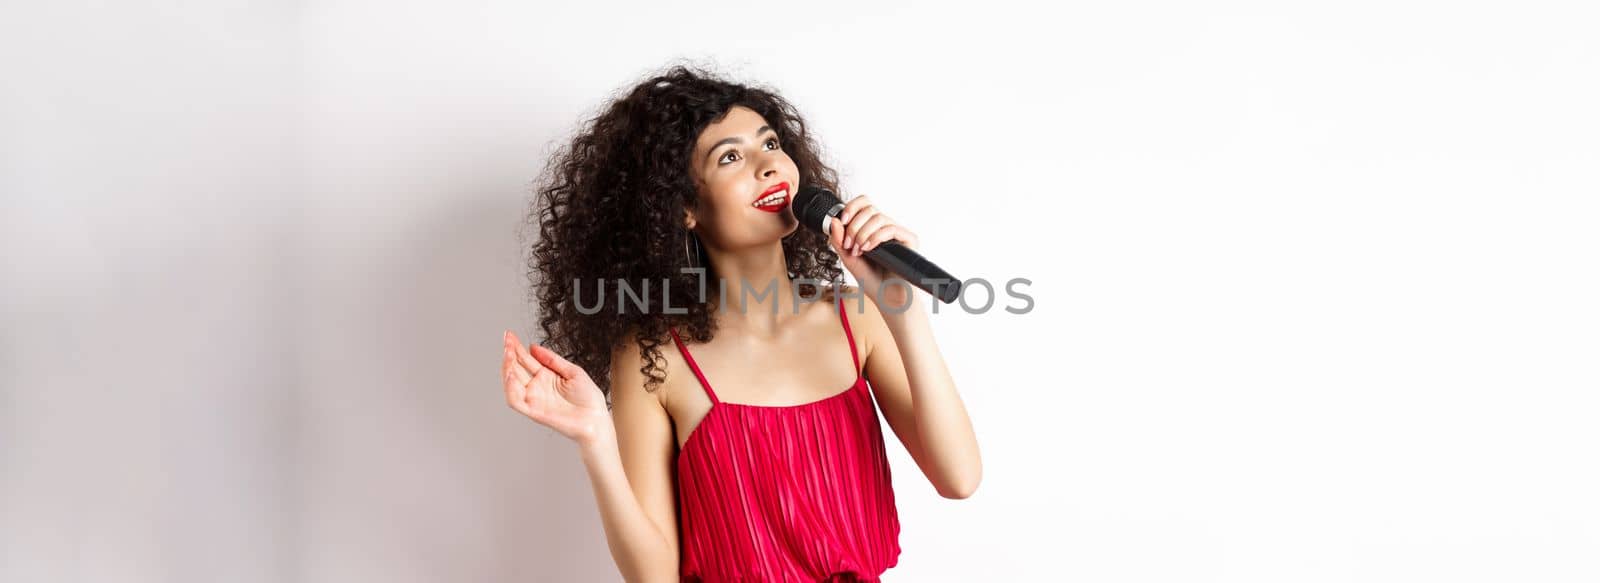 Beautiful lady in red dress singing songs in microphone, smiling and looking up, standing on white background.